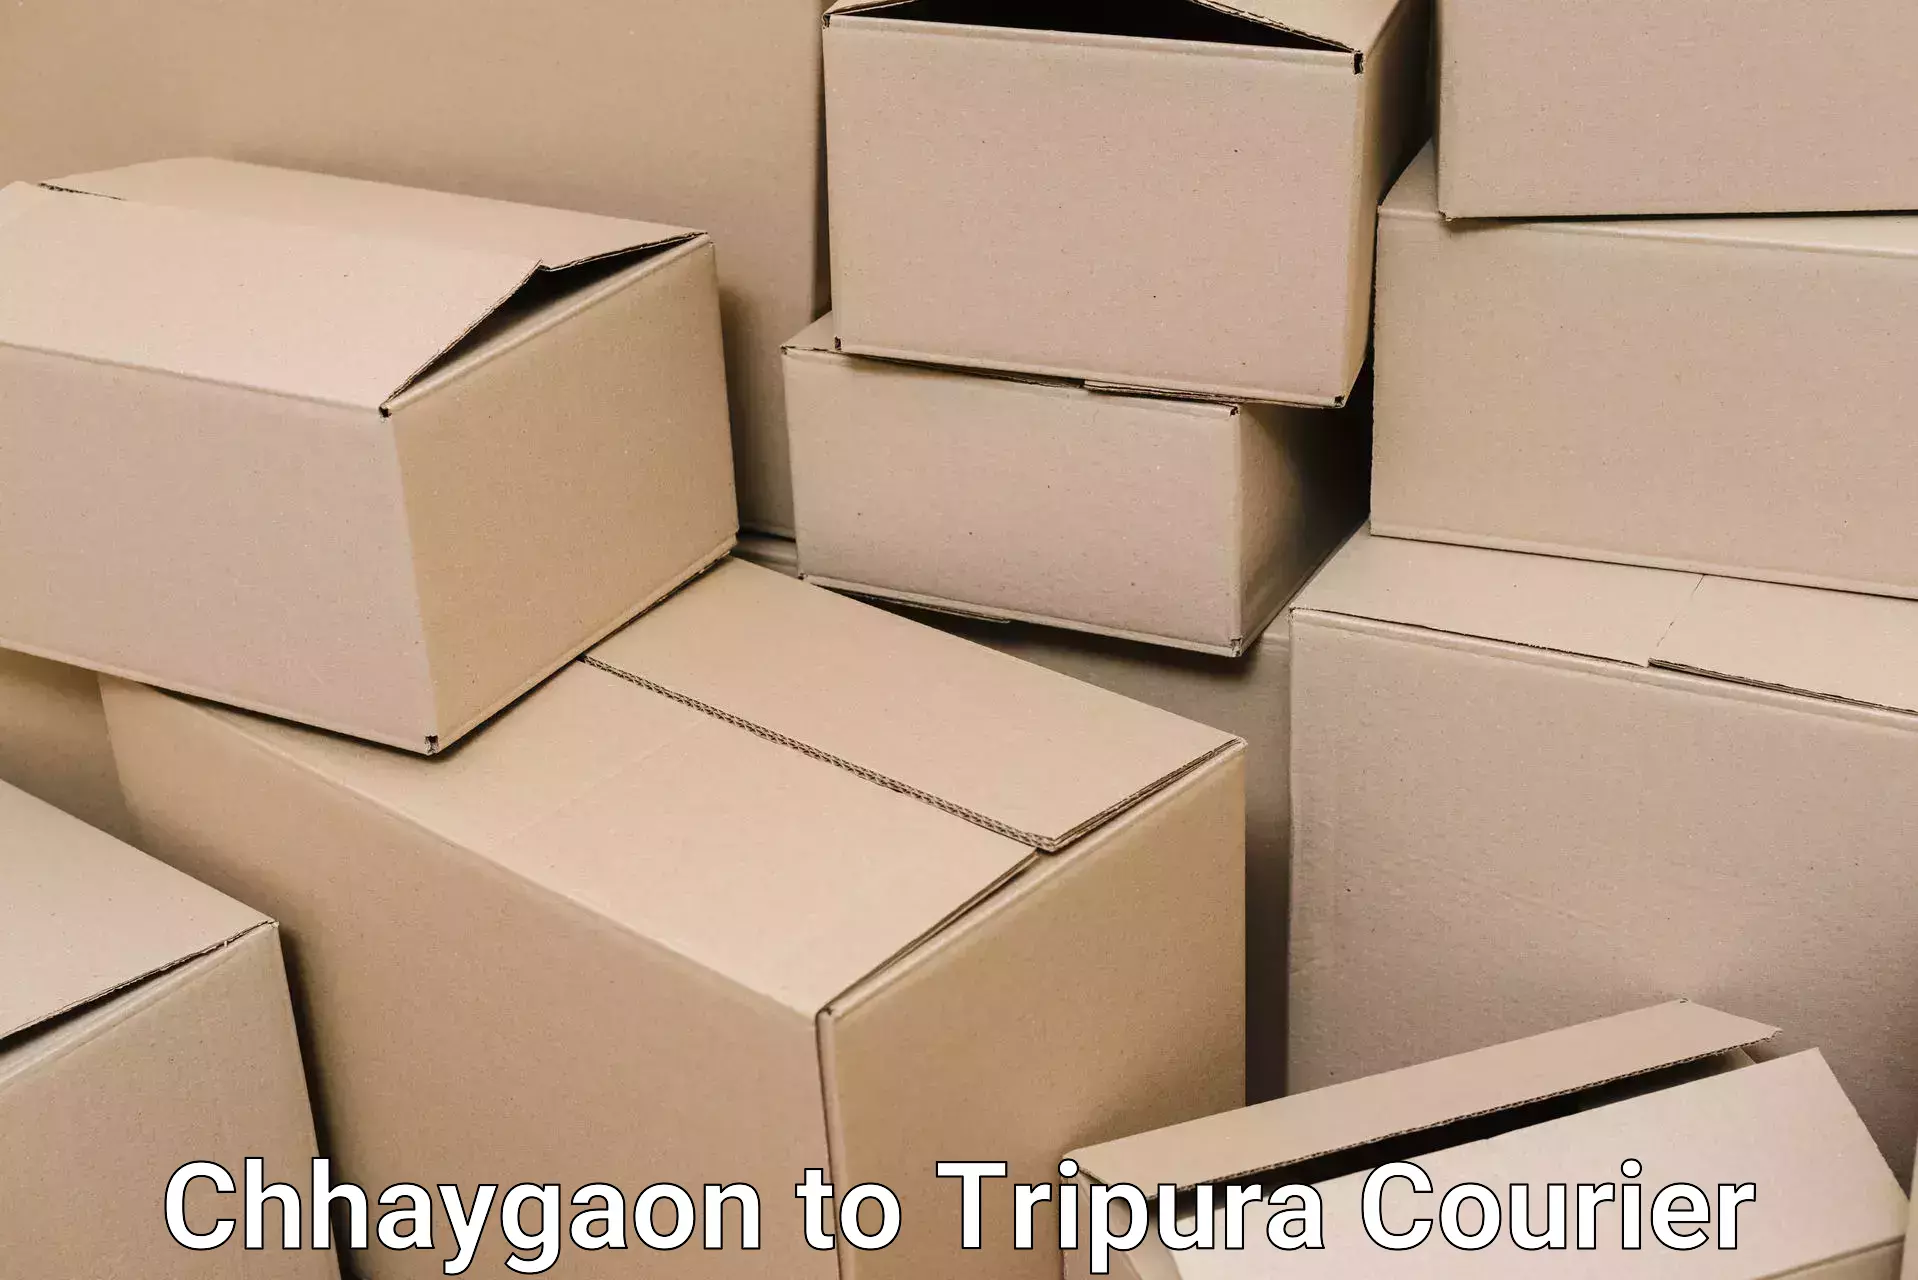 Trusted furniture transport Chhaygaon to Agartala